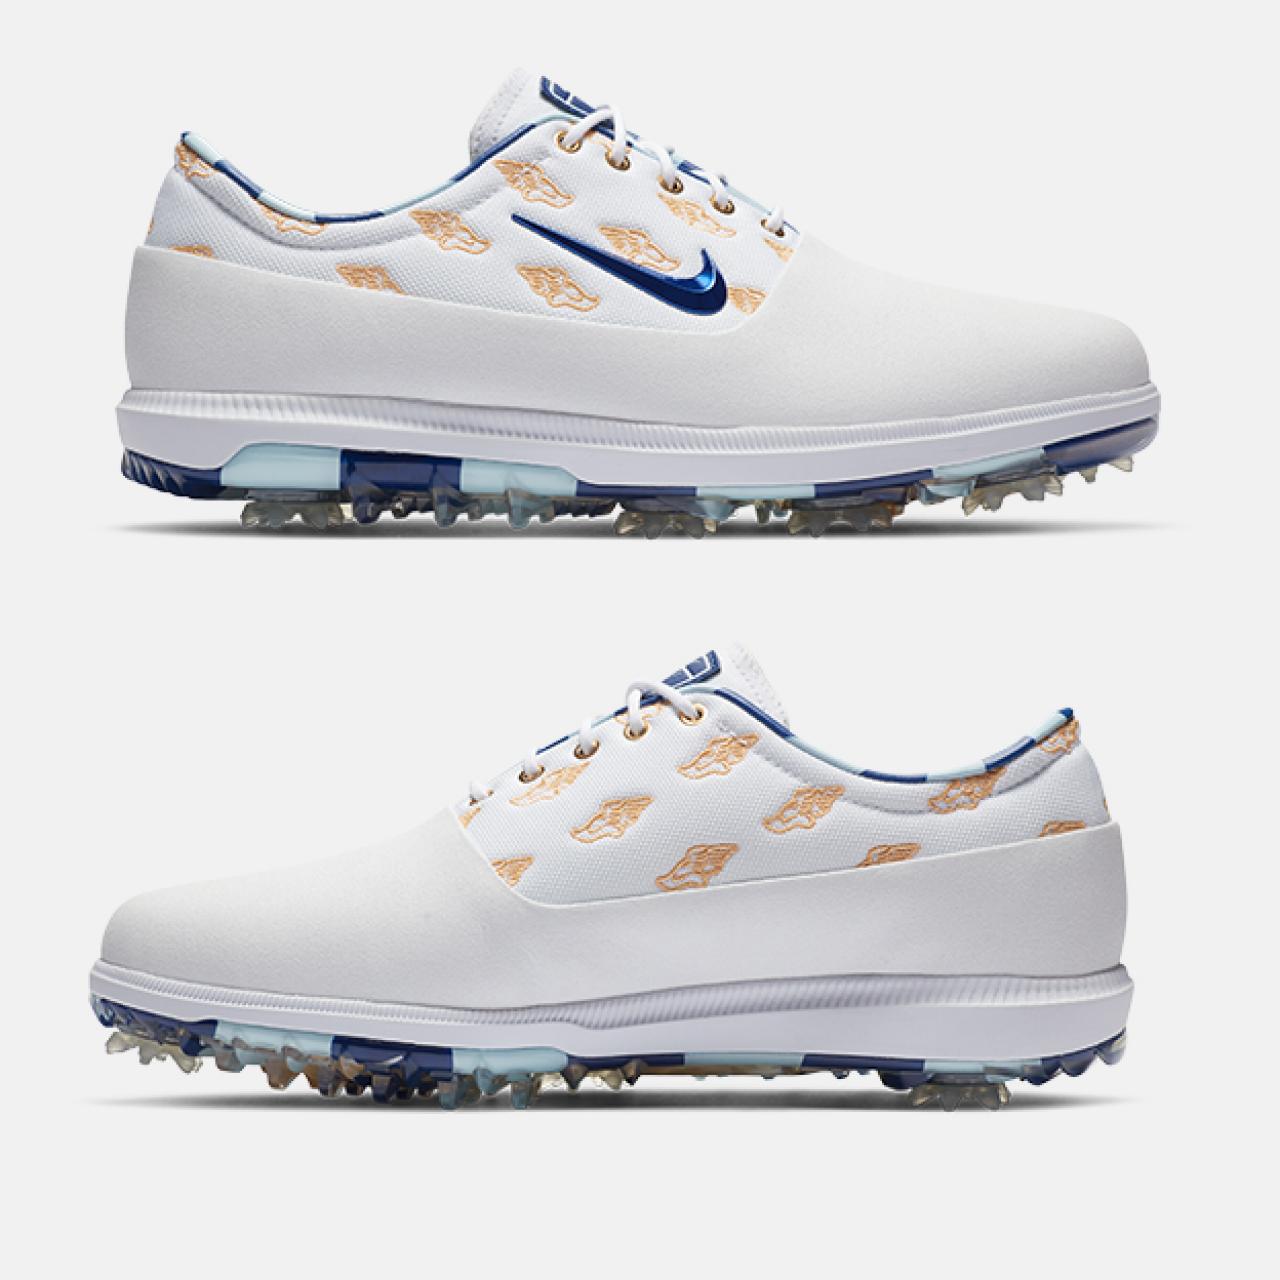 Winged Foot-inspired golf shoes 